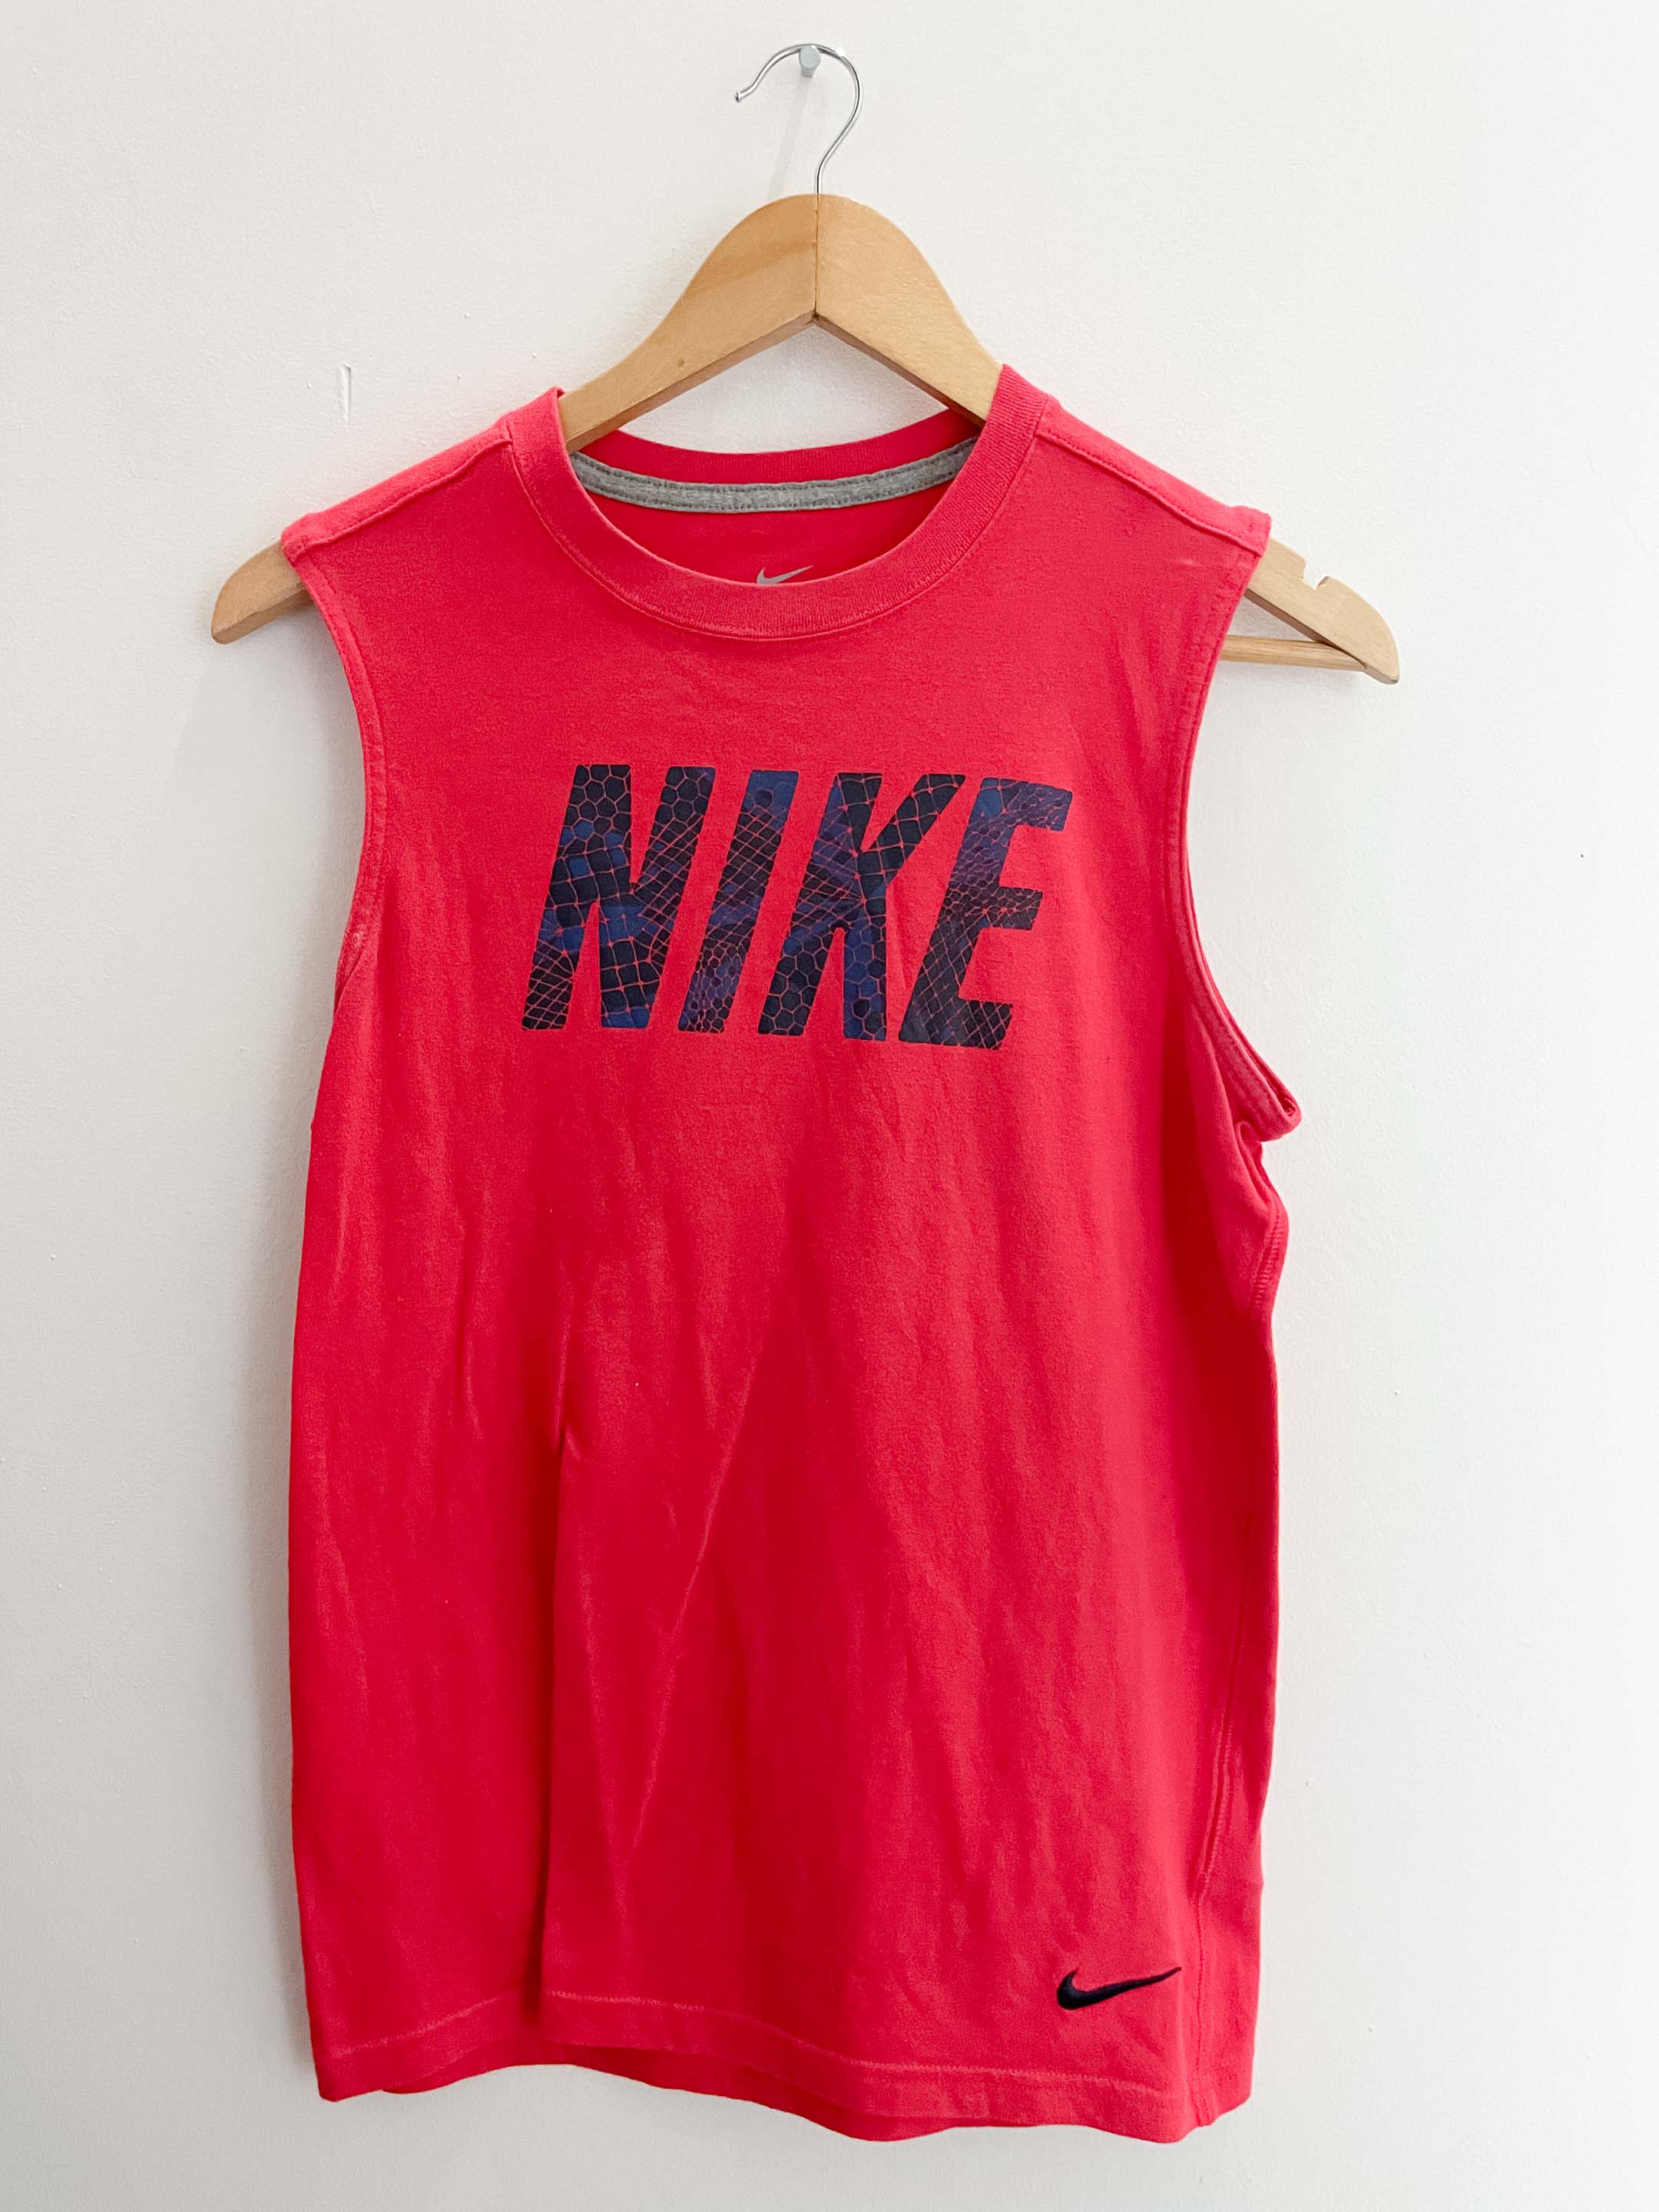 Vintage womens nike red sleeveless large top